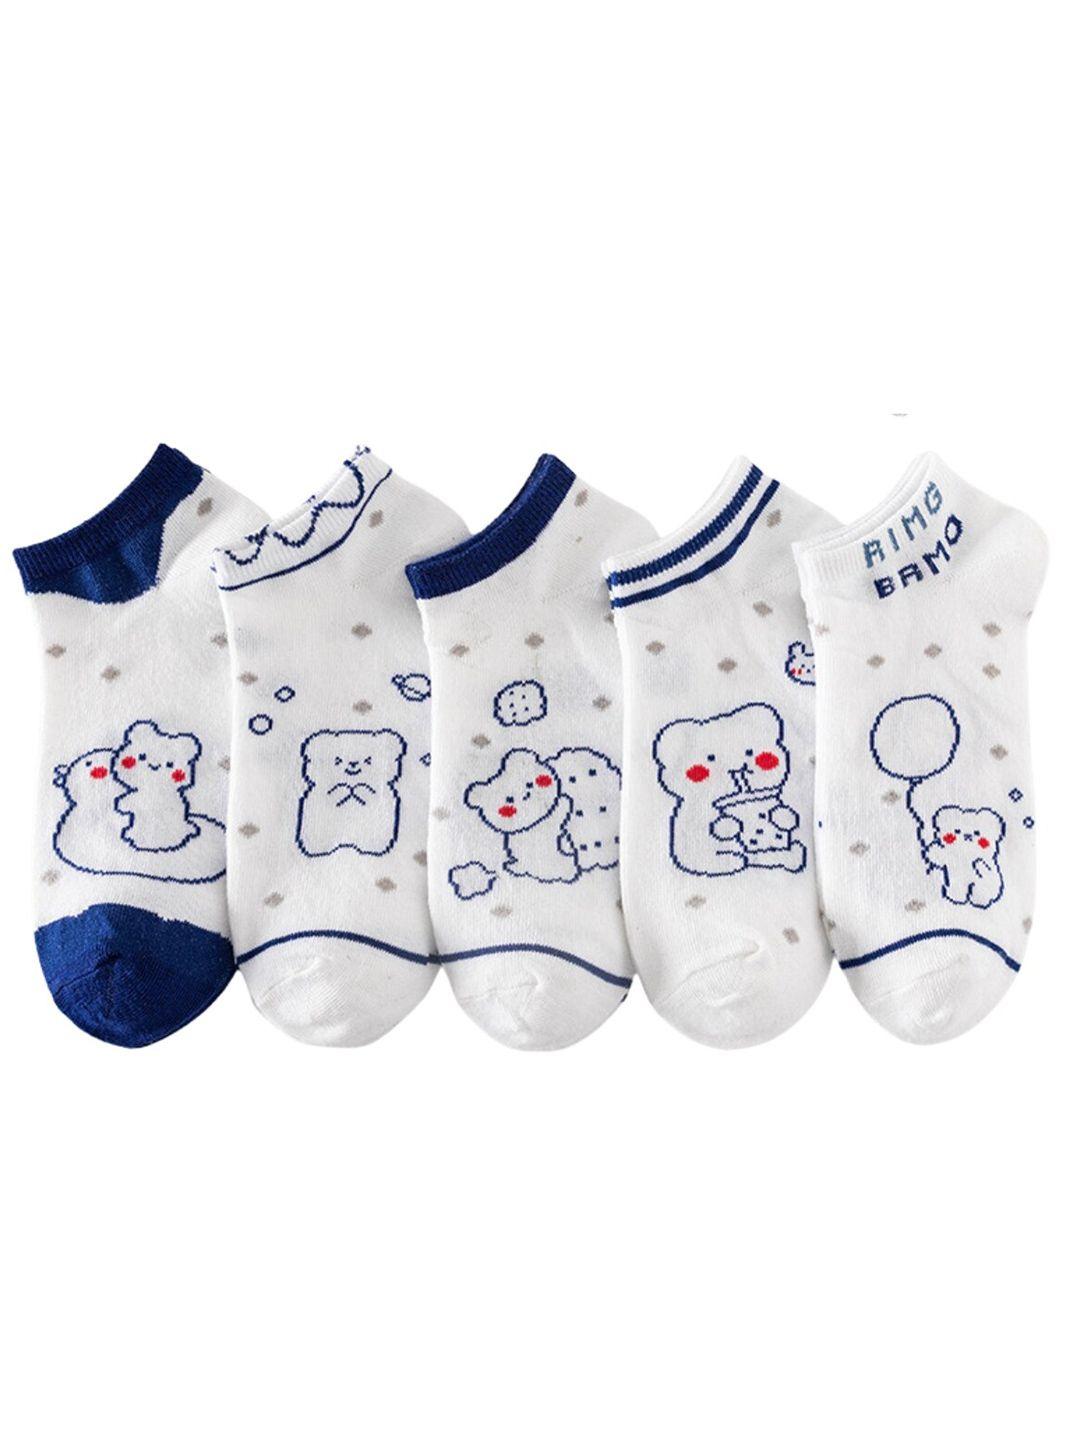 youstylo men pack of 5 patterned cotton bamboo ankle -length socks